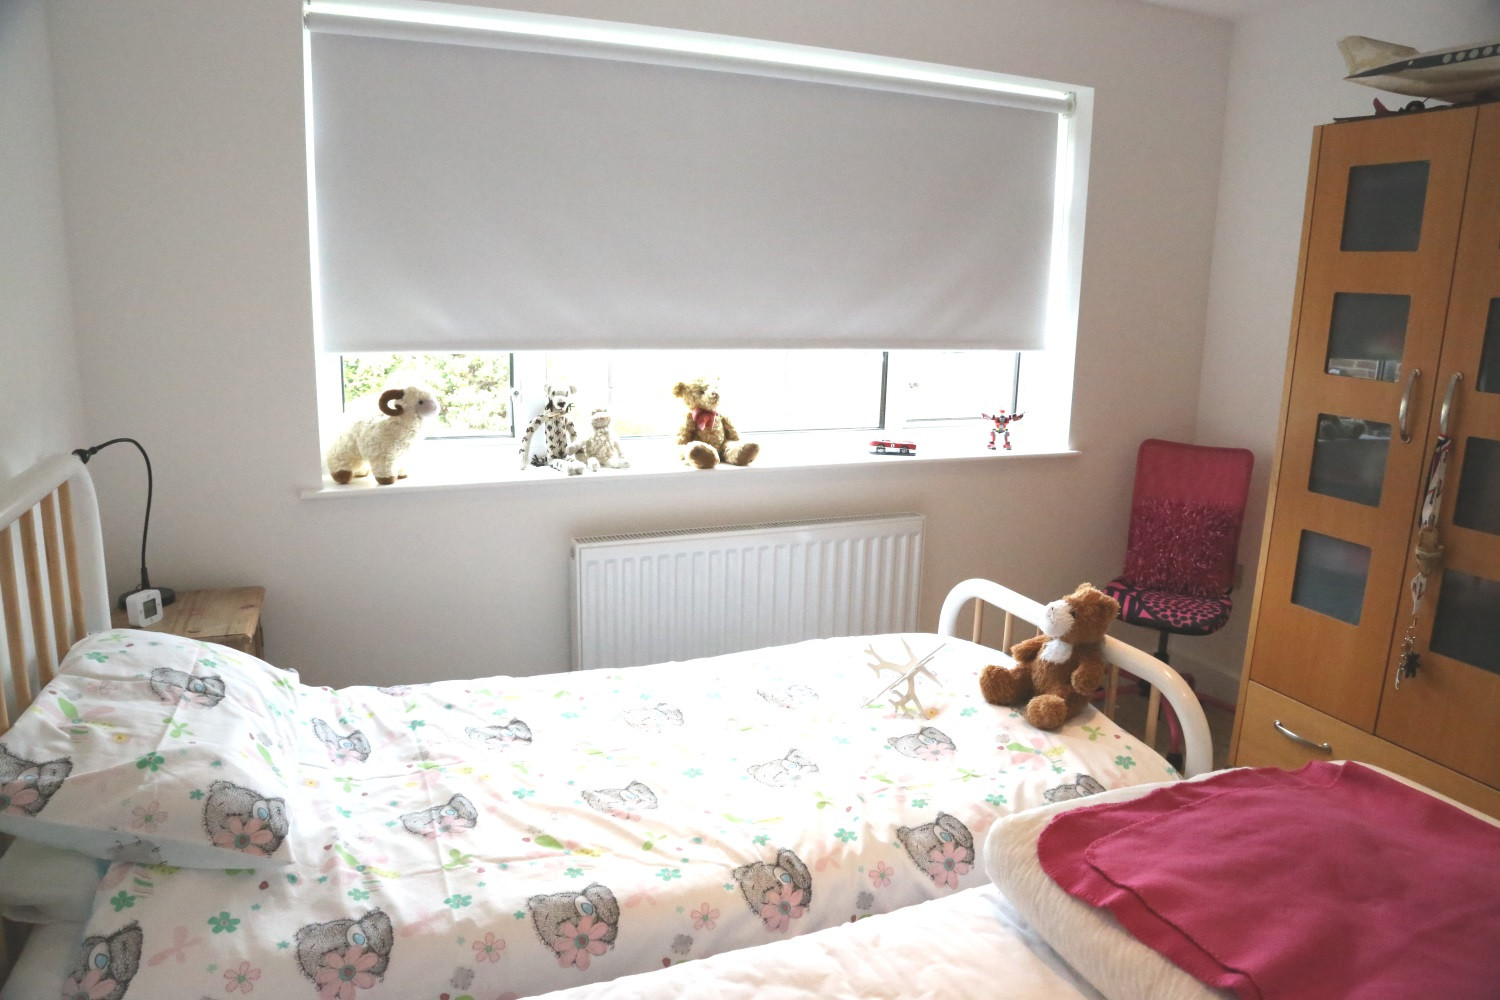 Blinds For Kids Room
 What are the best blinds to keep light out